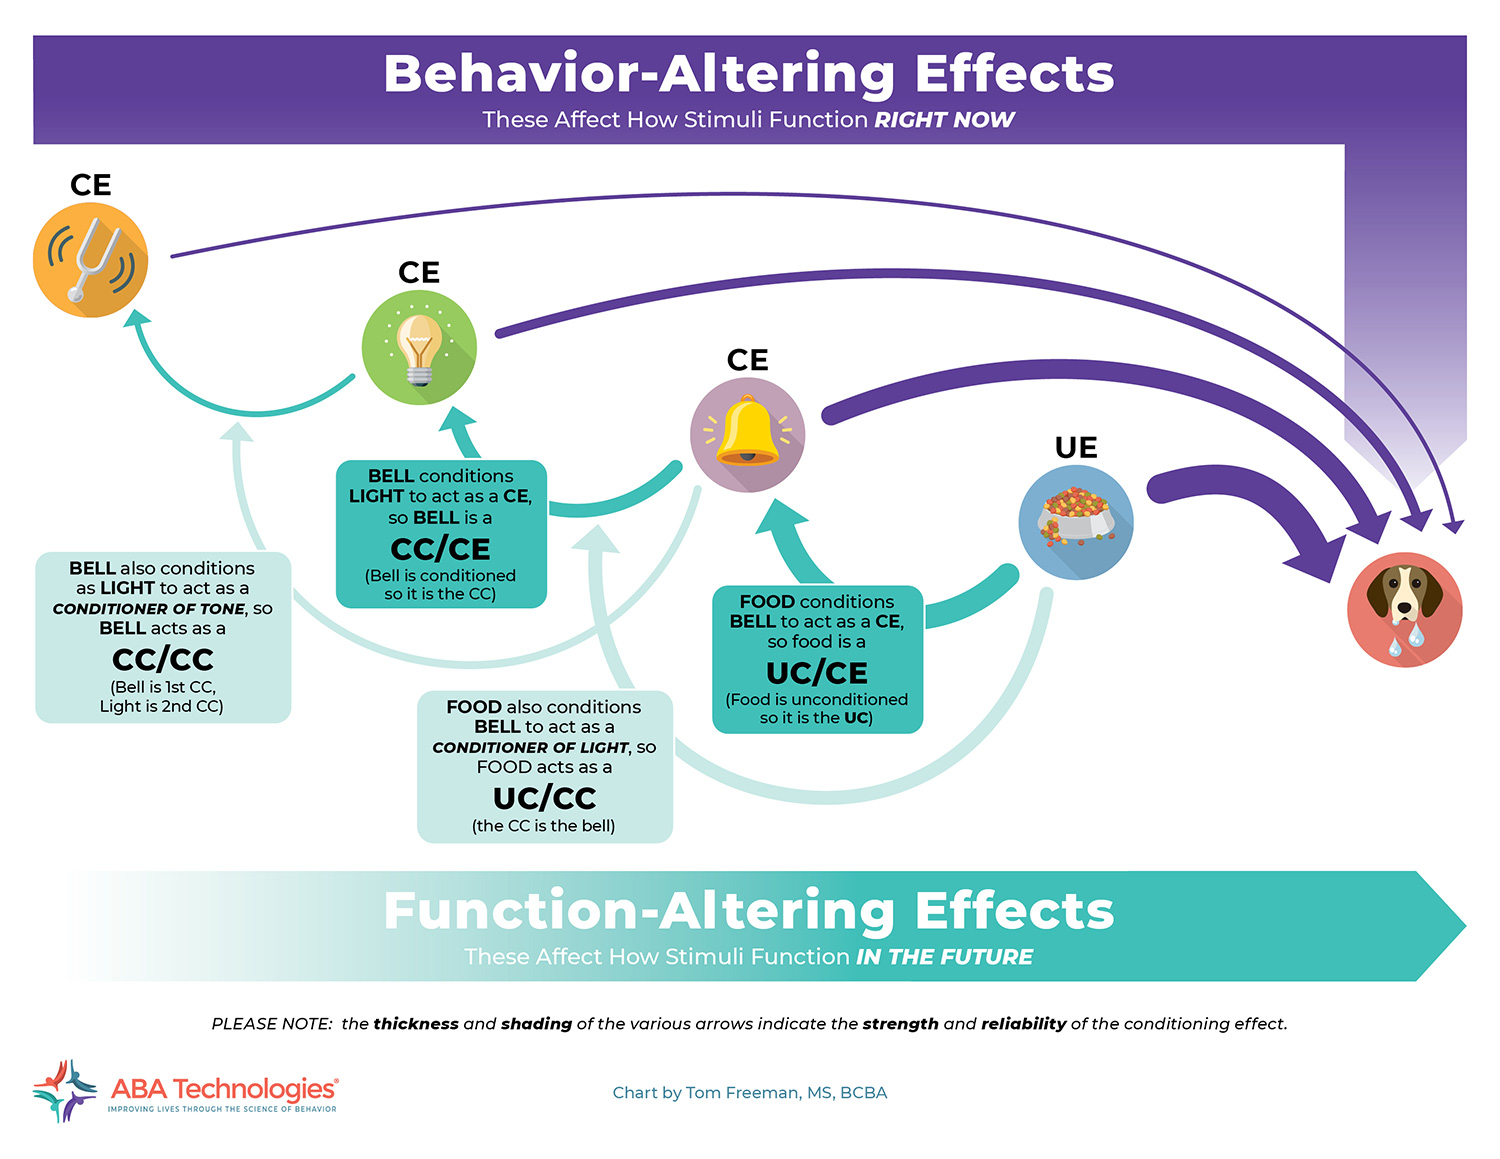 Behavior altering affects These affect how stimuli function right now